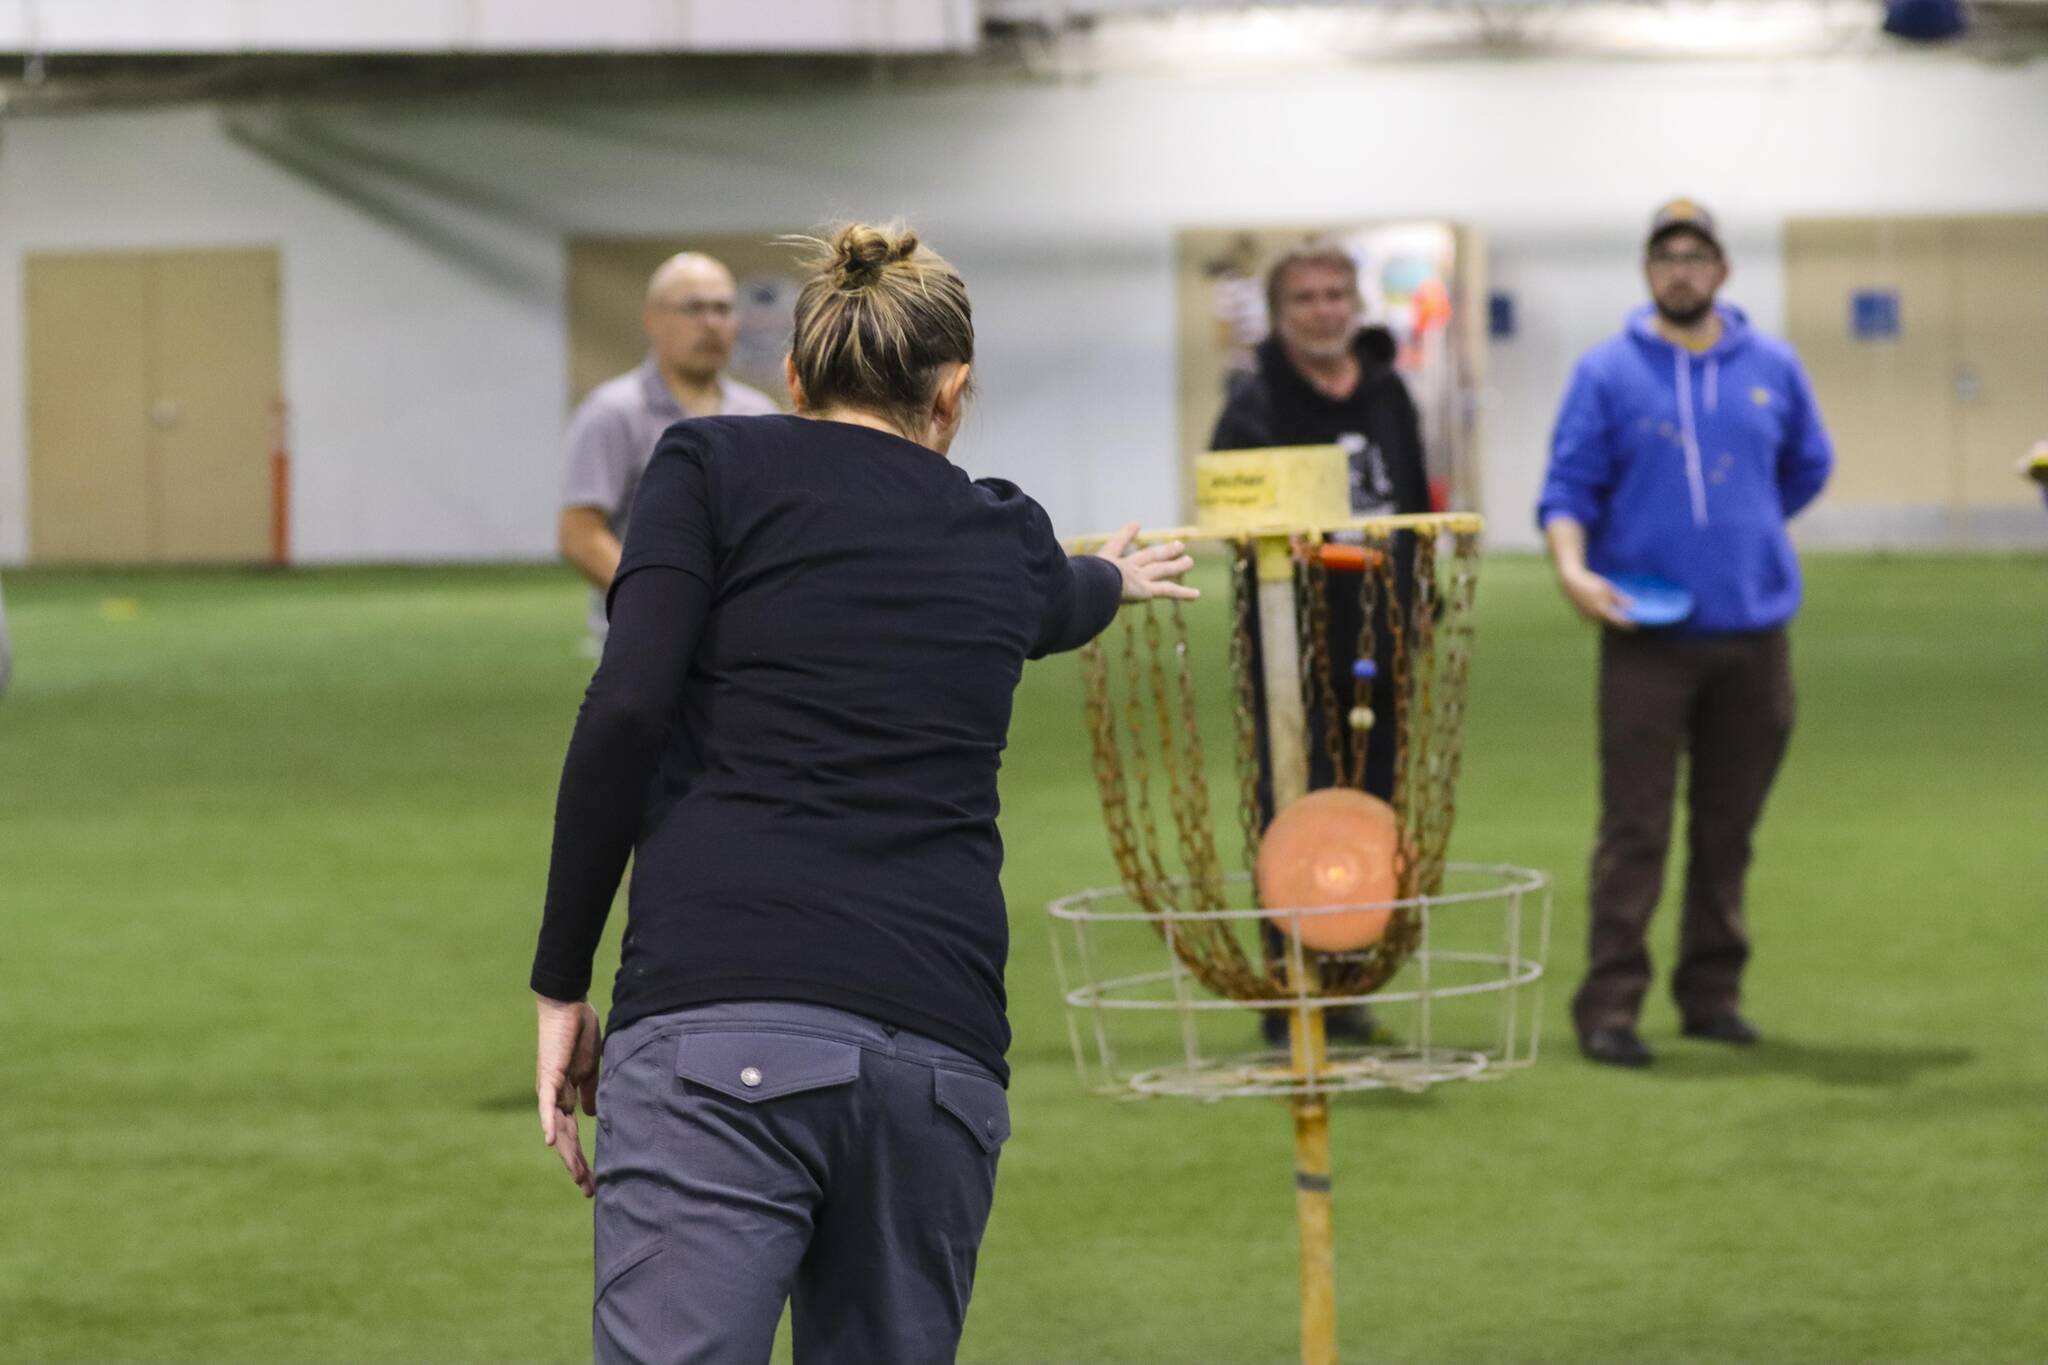 Michael S. Lockett / Juneau Empire
Zoe AnDyke, professional disc golf player and founder/director of Uplay, throws a disc at the target during a community workshop at Dimond Park Field House on May 12, 2022.